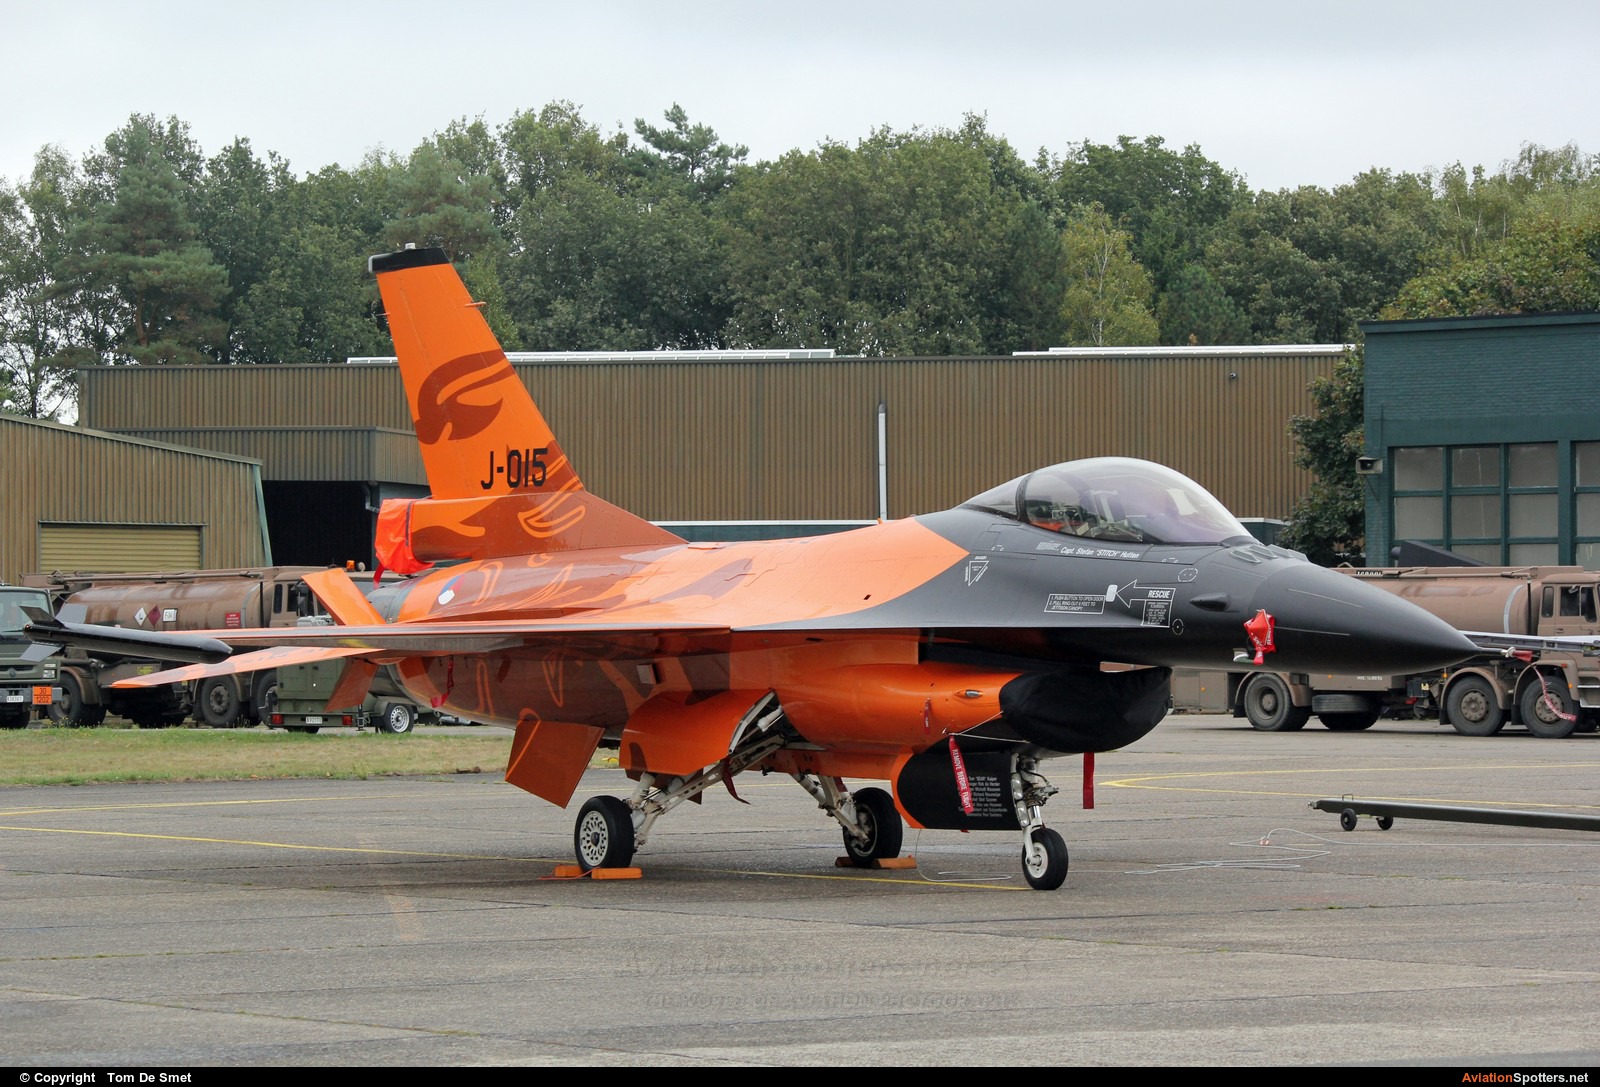 Netherlands - Air Force  -  F-16AM Fighting Falcon  (J-015) By Tom De Smet (Tommer)